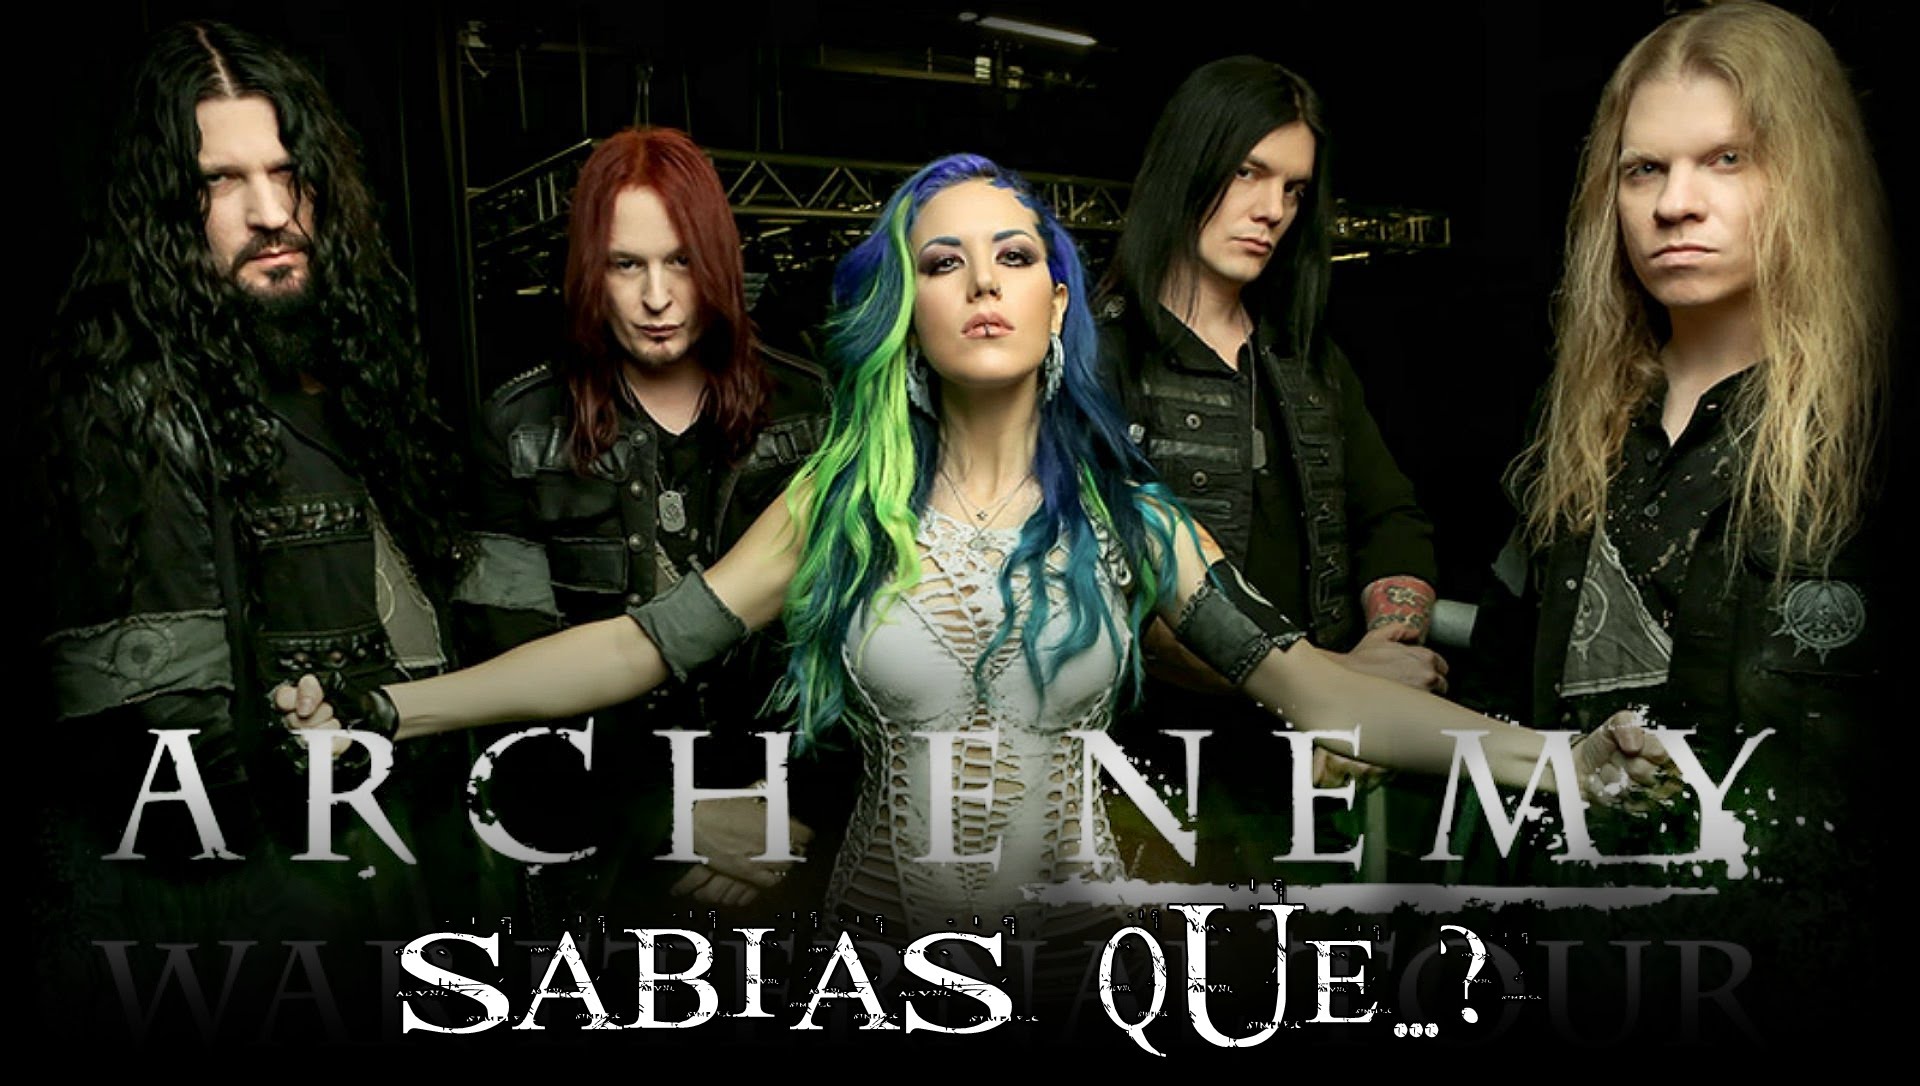 Arch Enemy wallpapers, Music, HQ Arch Enemy pictures | 4K Wallpapers 2019